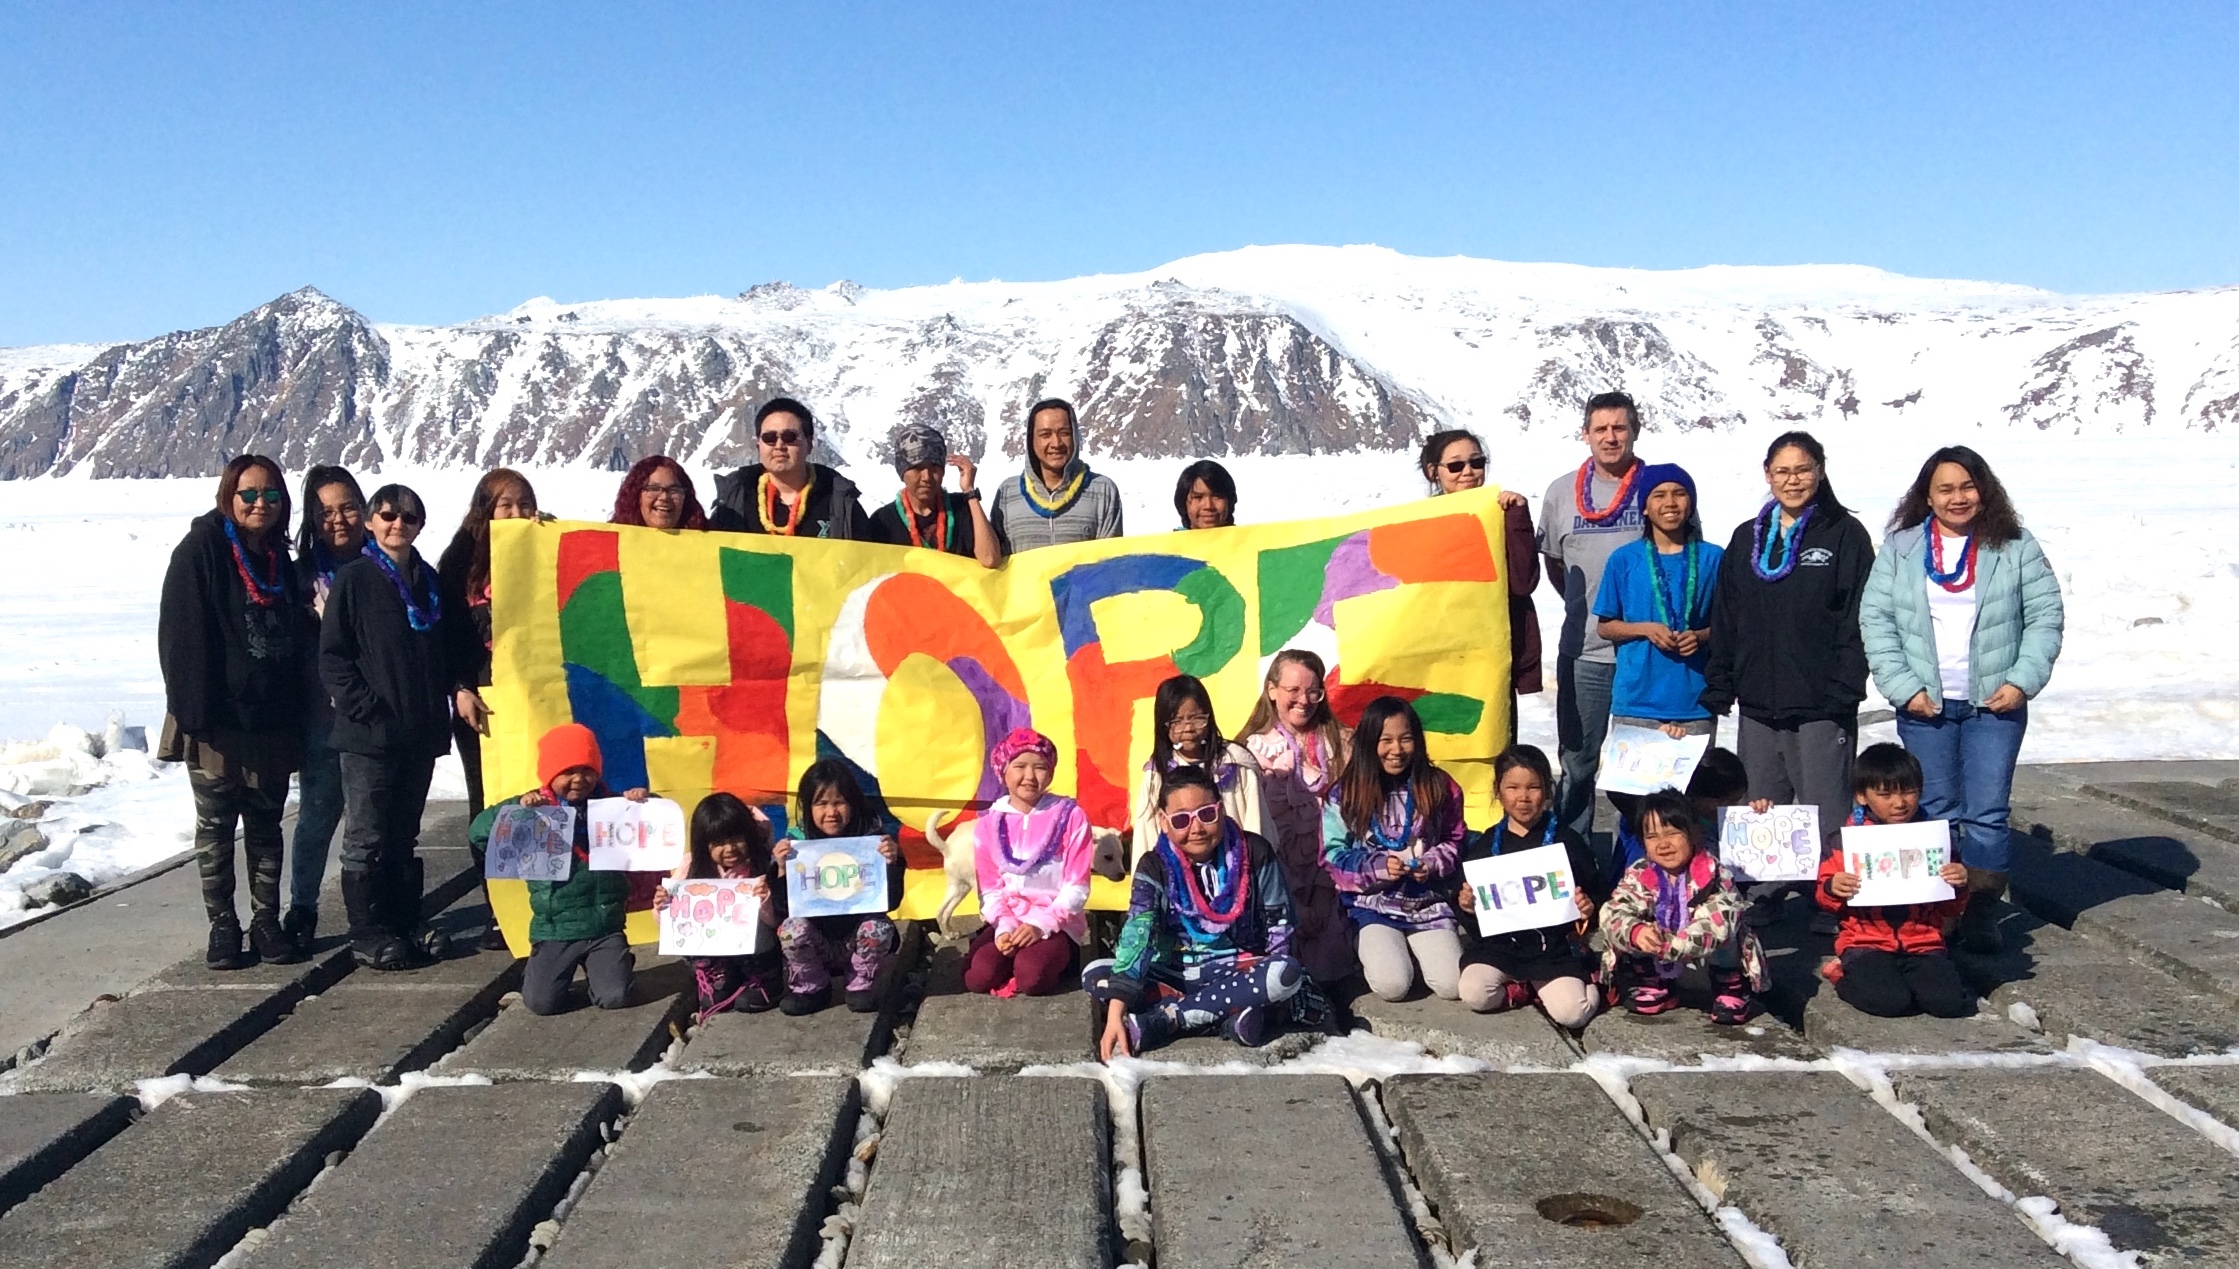 Diomede School Staff and Students with Hope sign